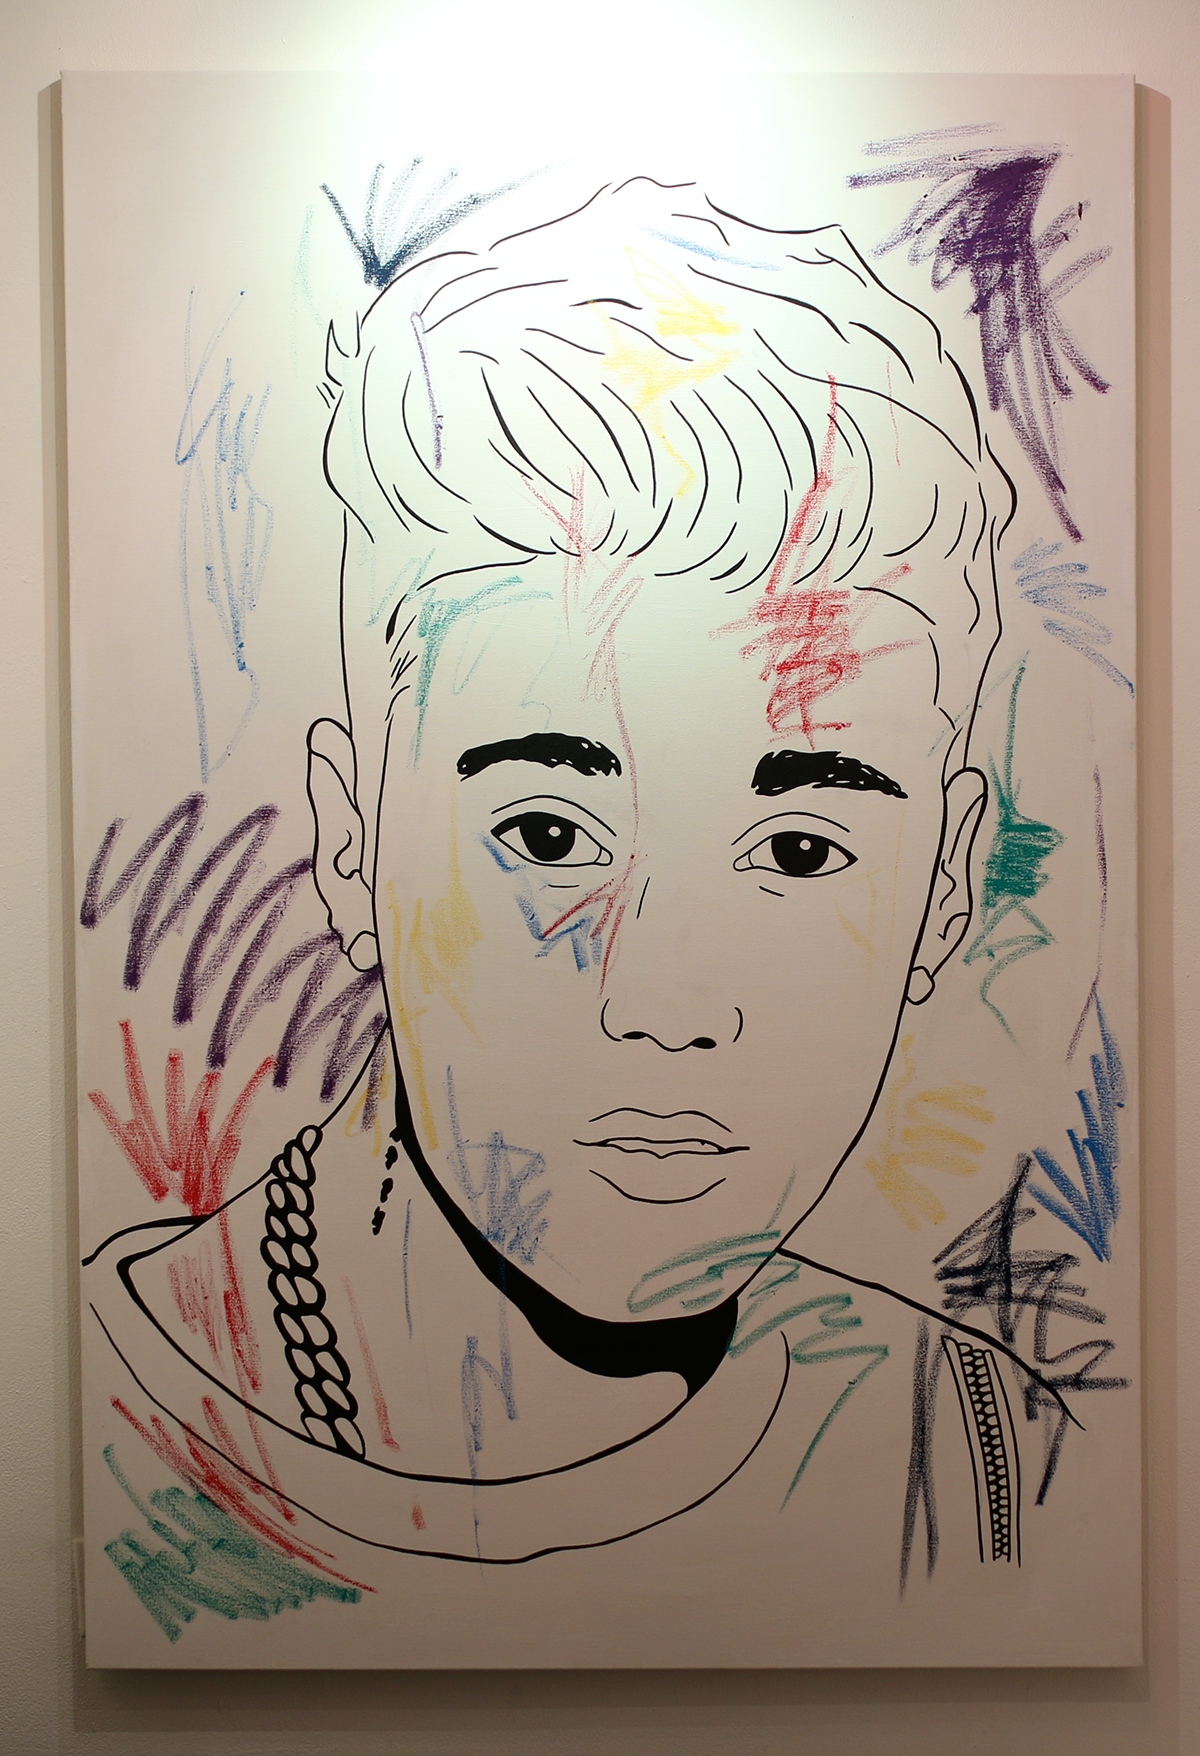 nyc Pop Art Celebrity icons city Brooklyn student Drake justin bieber fame graphic